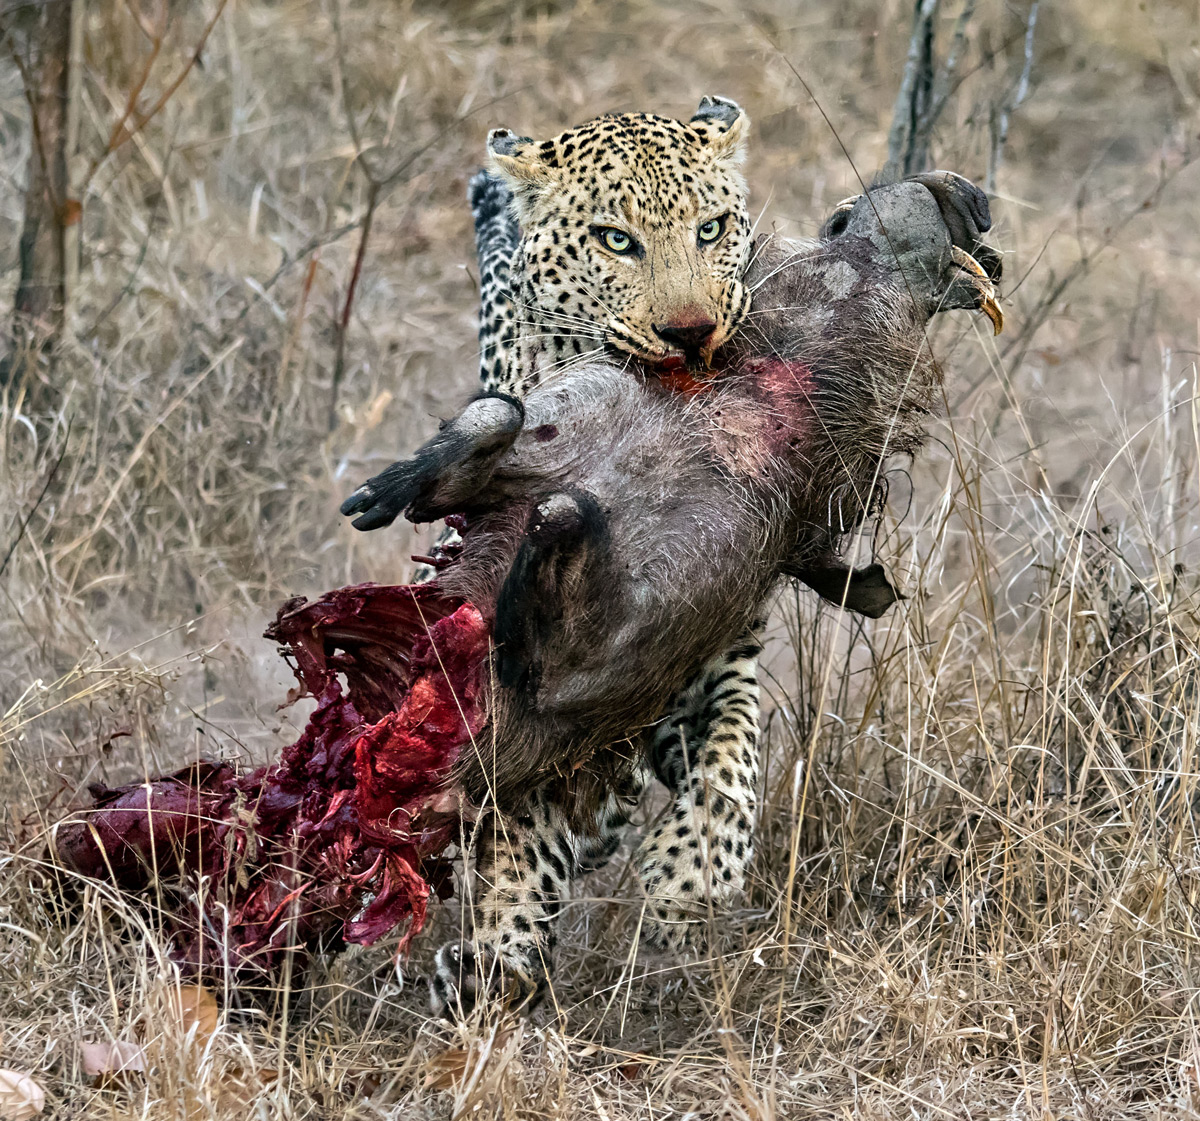 "This male leopard retrieved his warthog kill from a spotted hyena. Here he is running with the kill away from the hyena towards a tree" – Kruger National Park, South Africa © Ernest Porter 